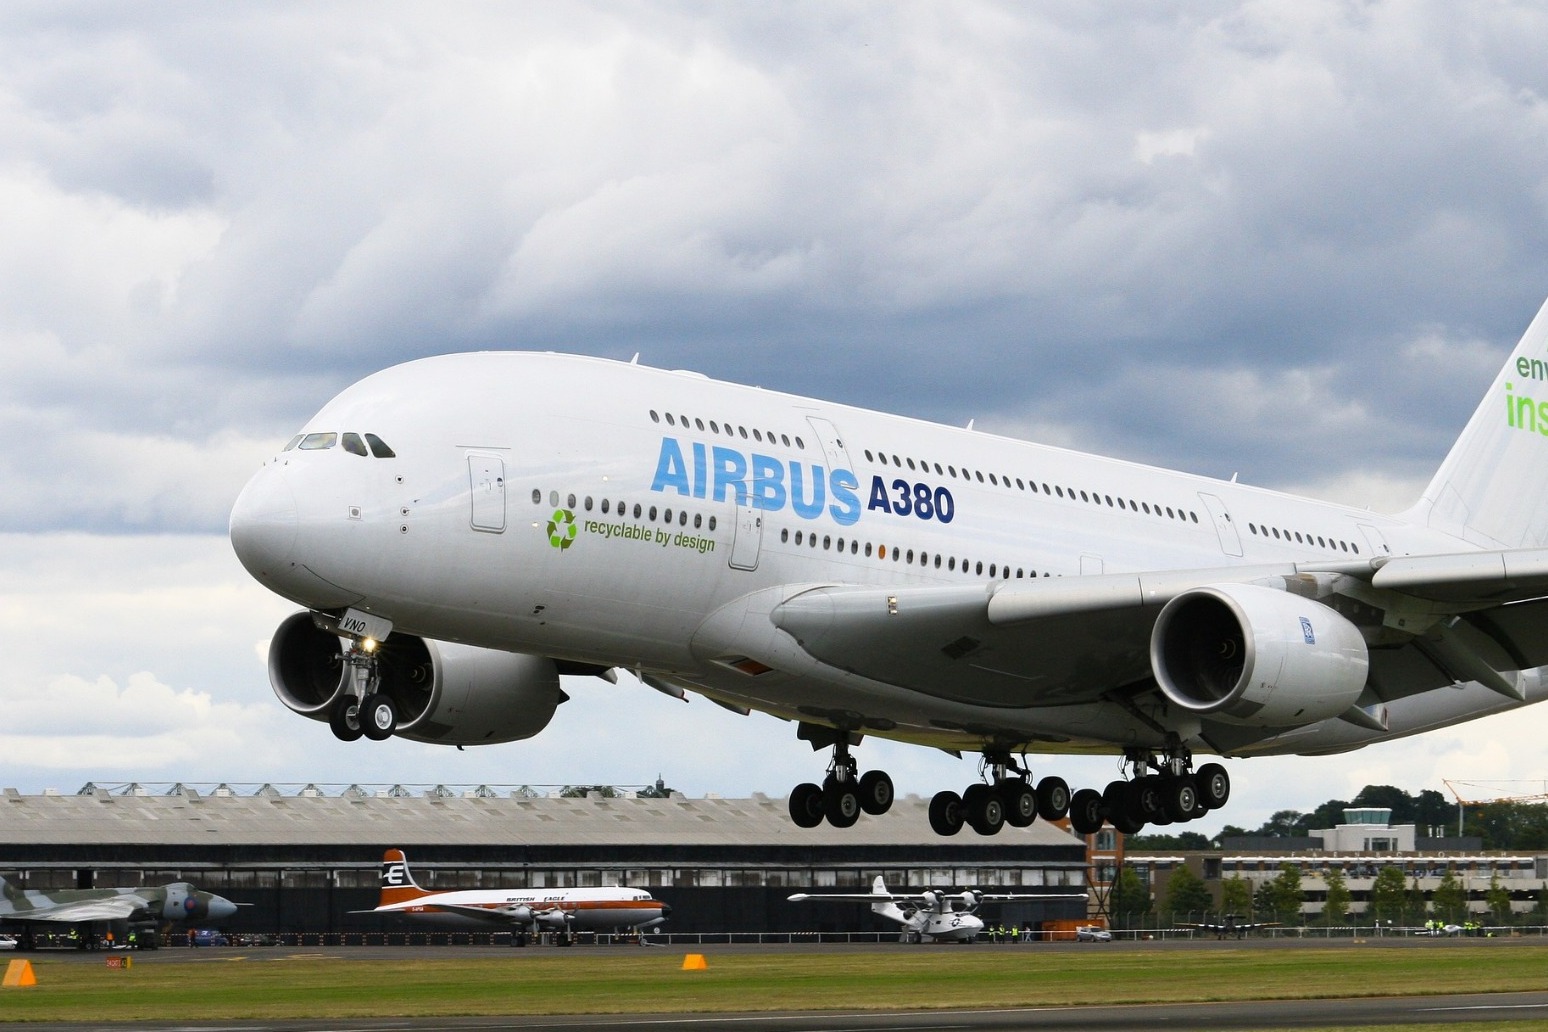 China denies involvement in cyber attacks on Airbus 